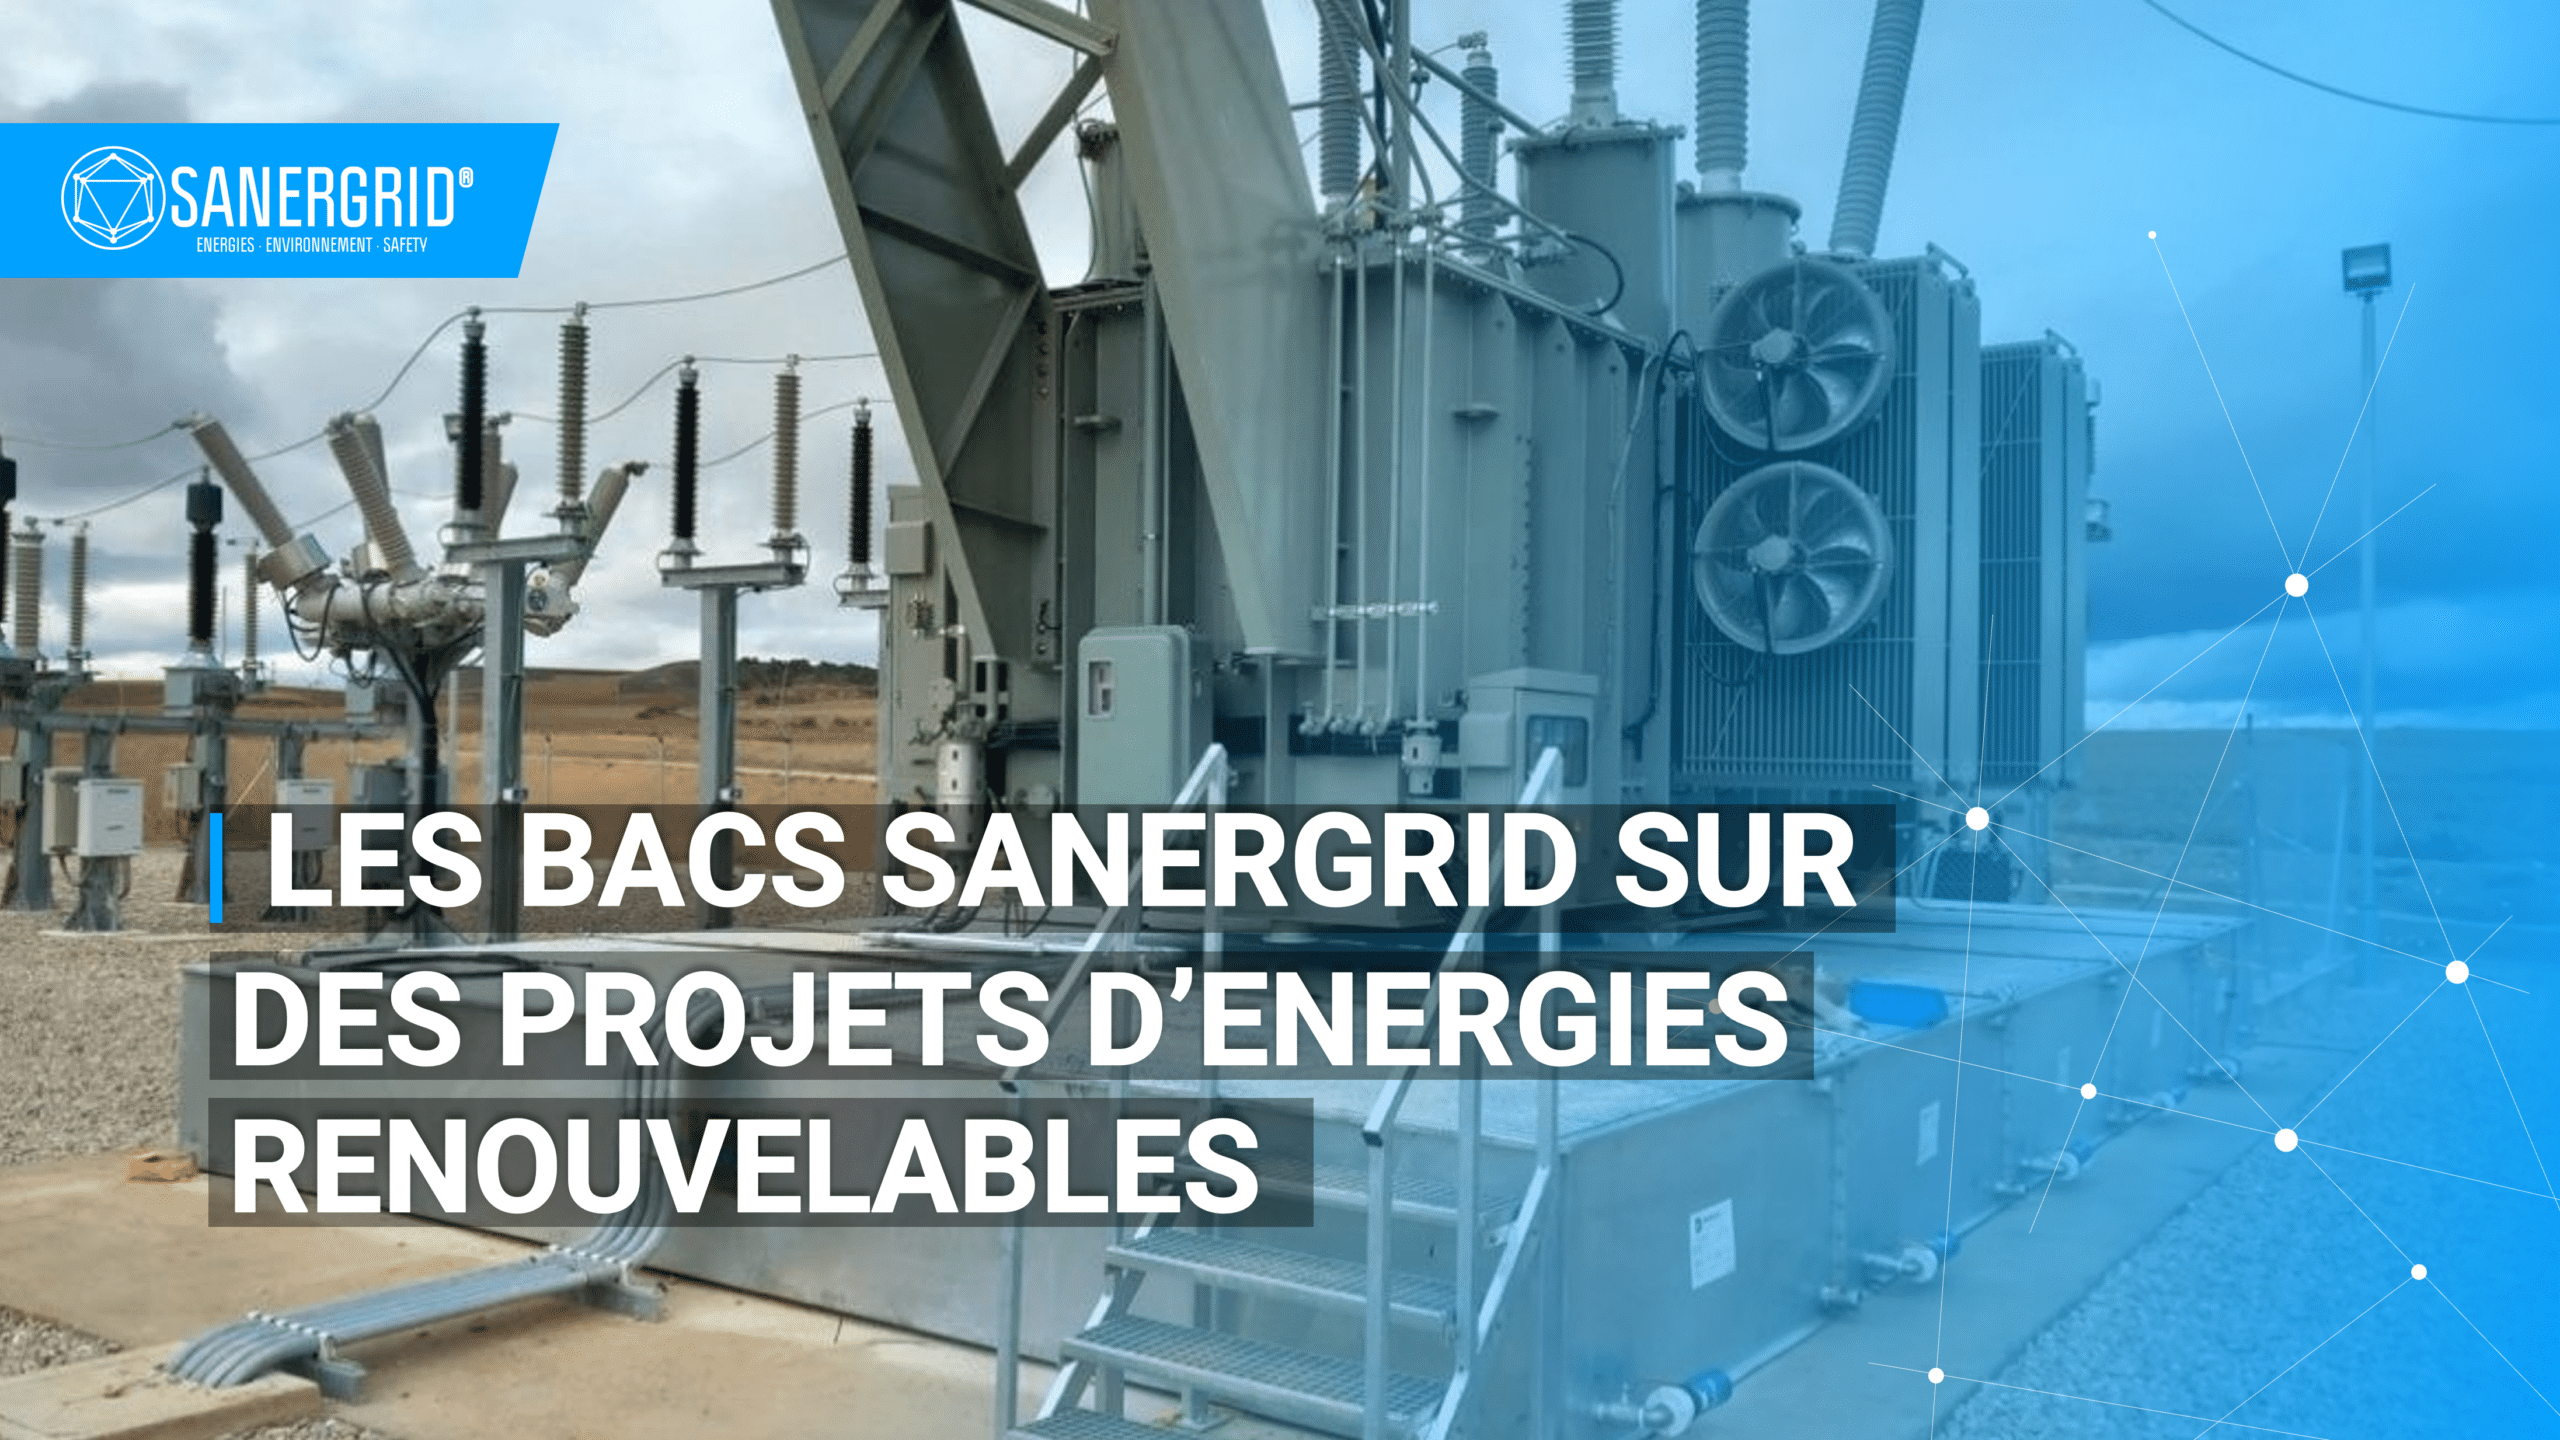 SANERGRID modular retention tanks for renewable energy projects